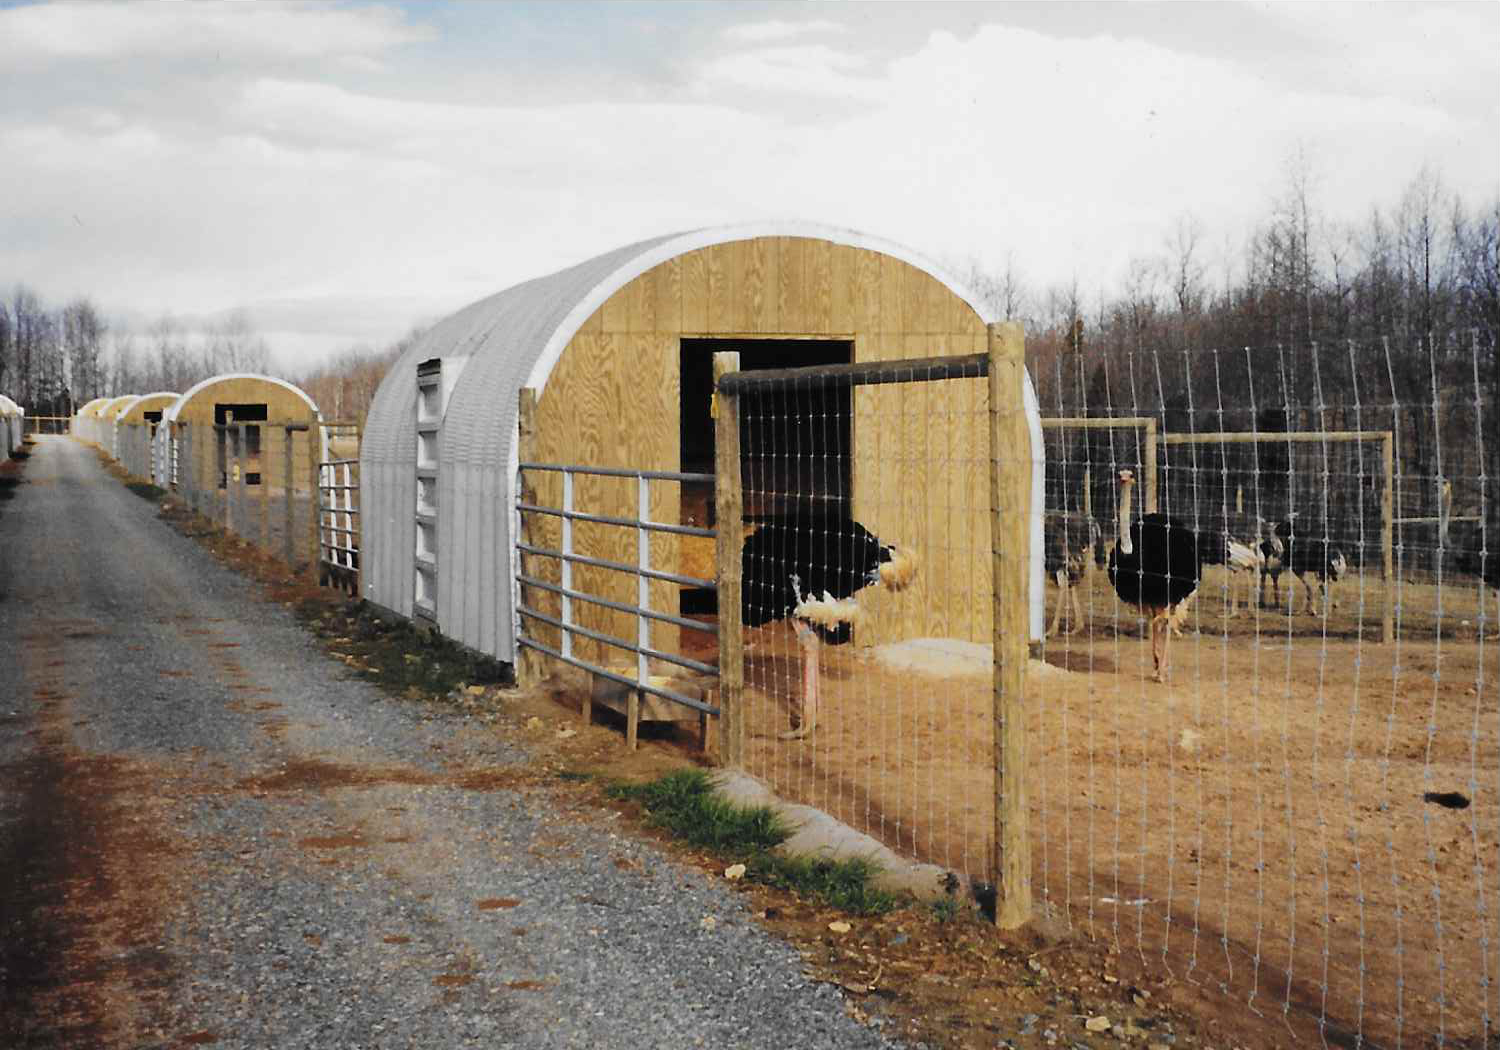 Steel buildings being used for Ostrich housing